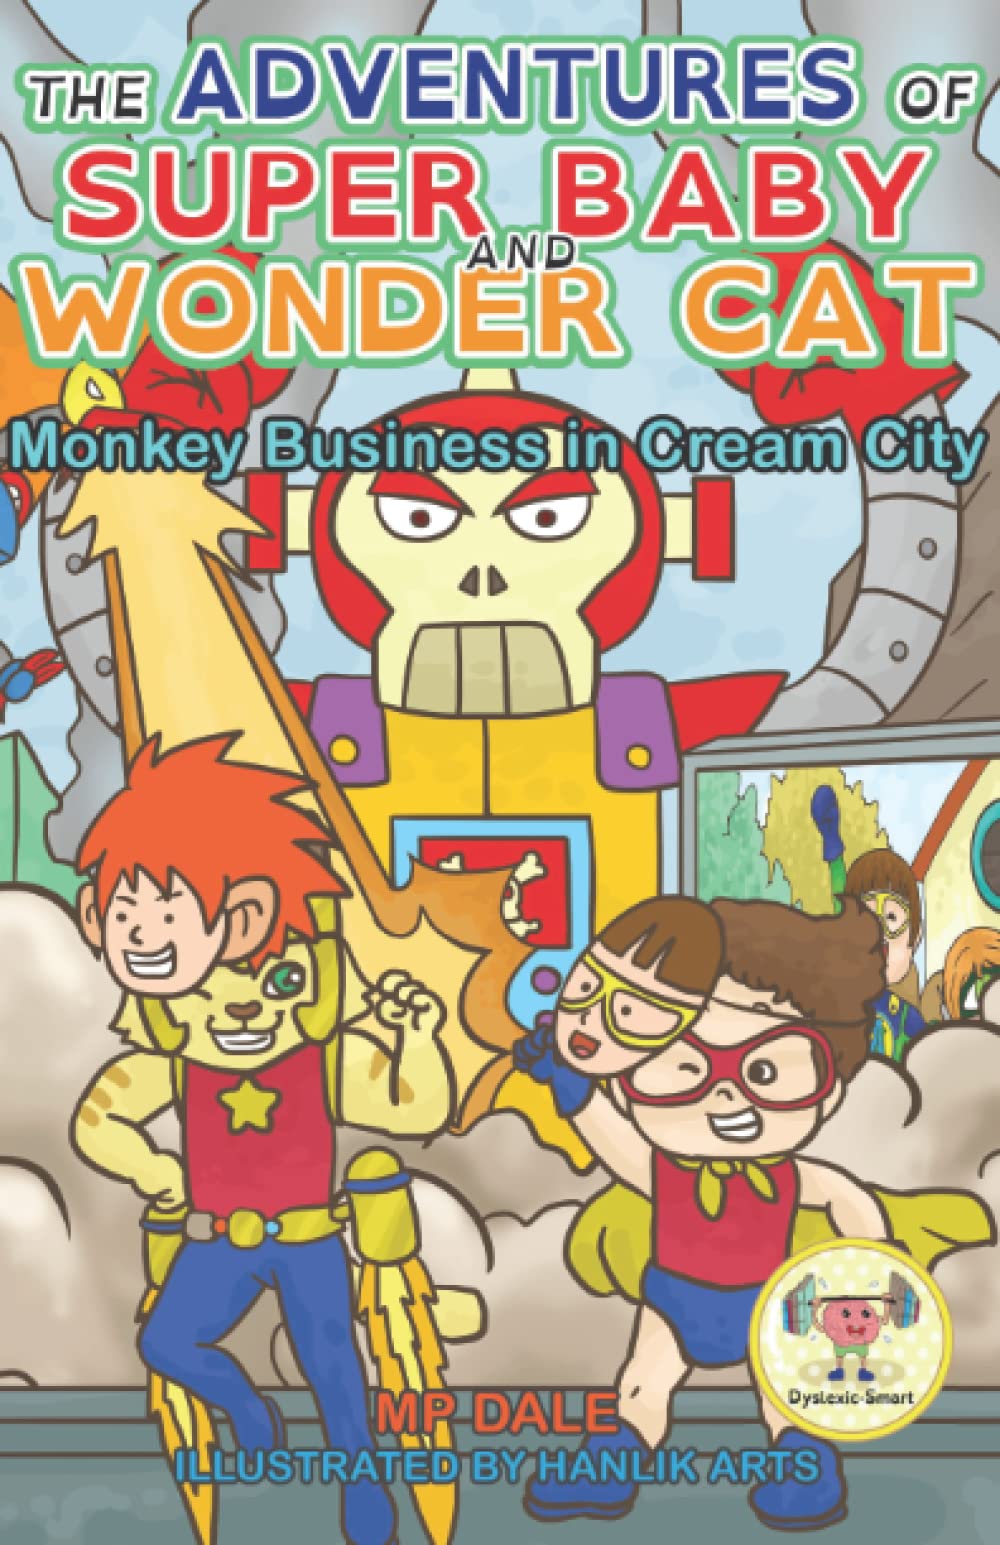 The Adventures of Super Baby: Monkey Business in Cream City